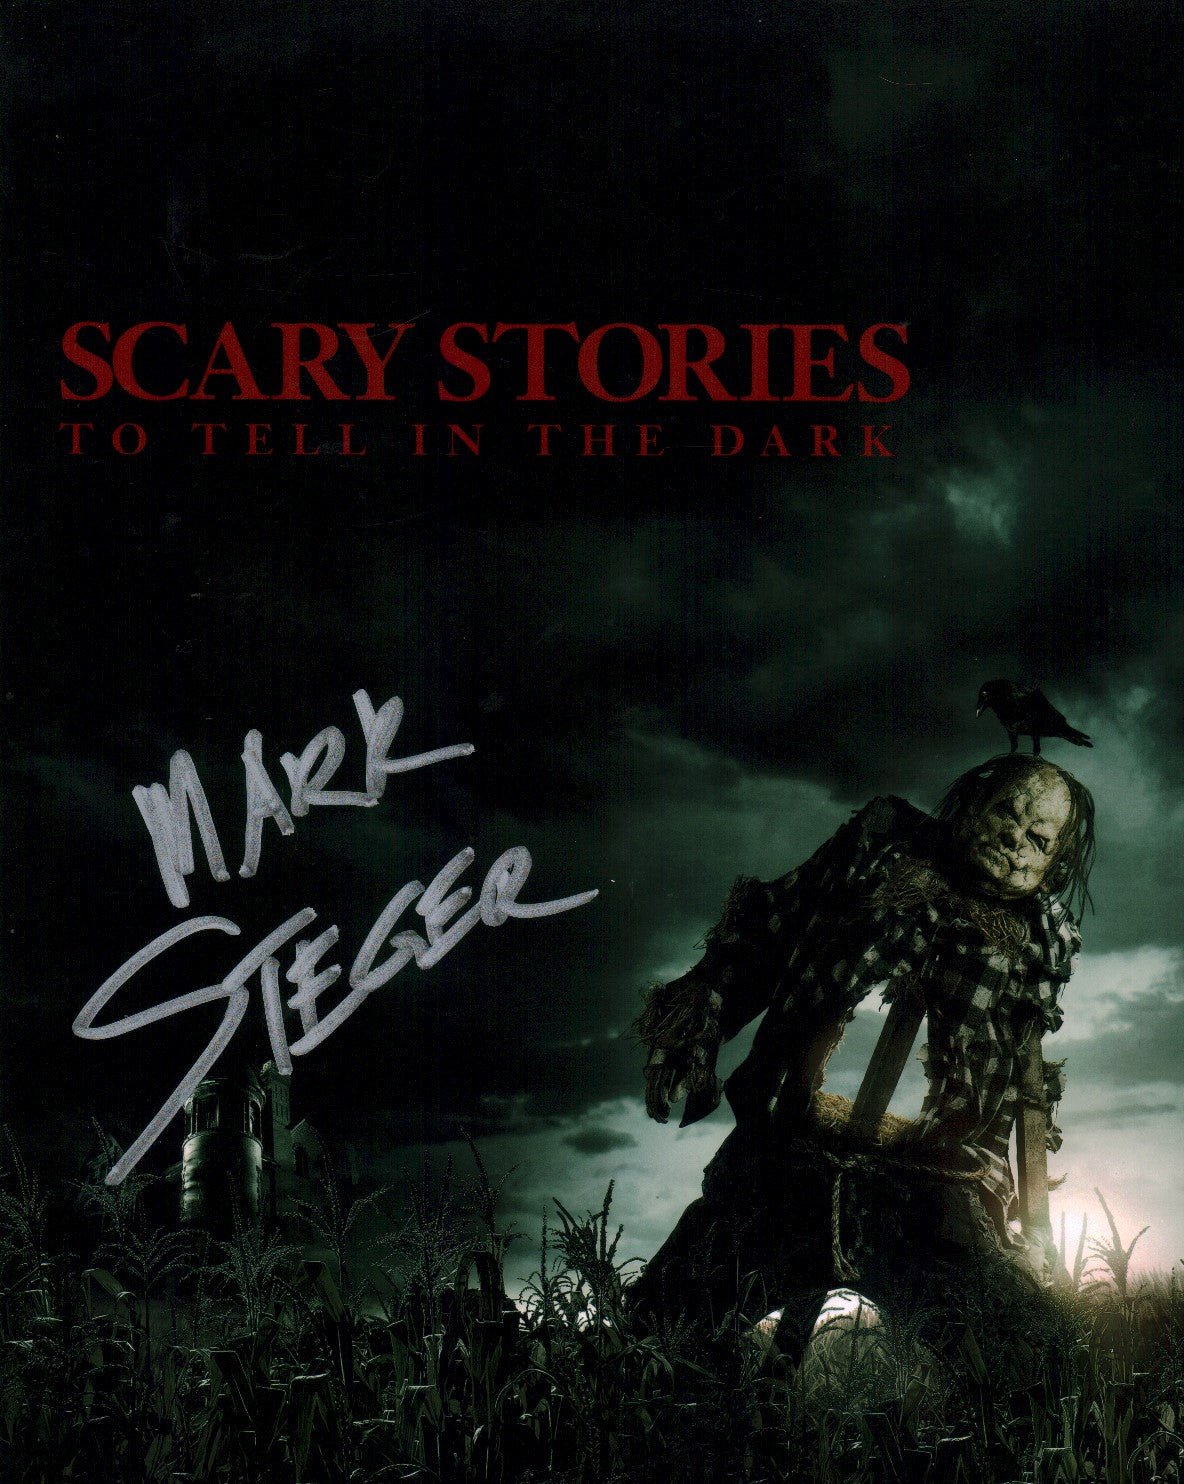 Mark Steger Scary Stories To Tell In The Dark 8x10 Signed Photo JSA Certified Autograph